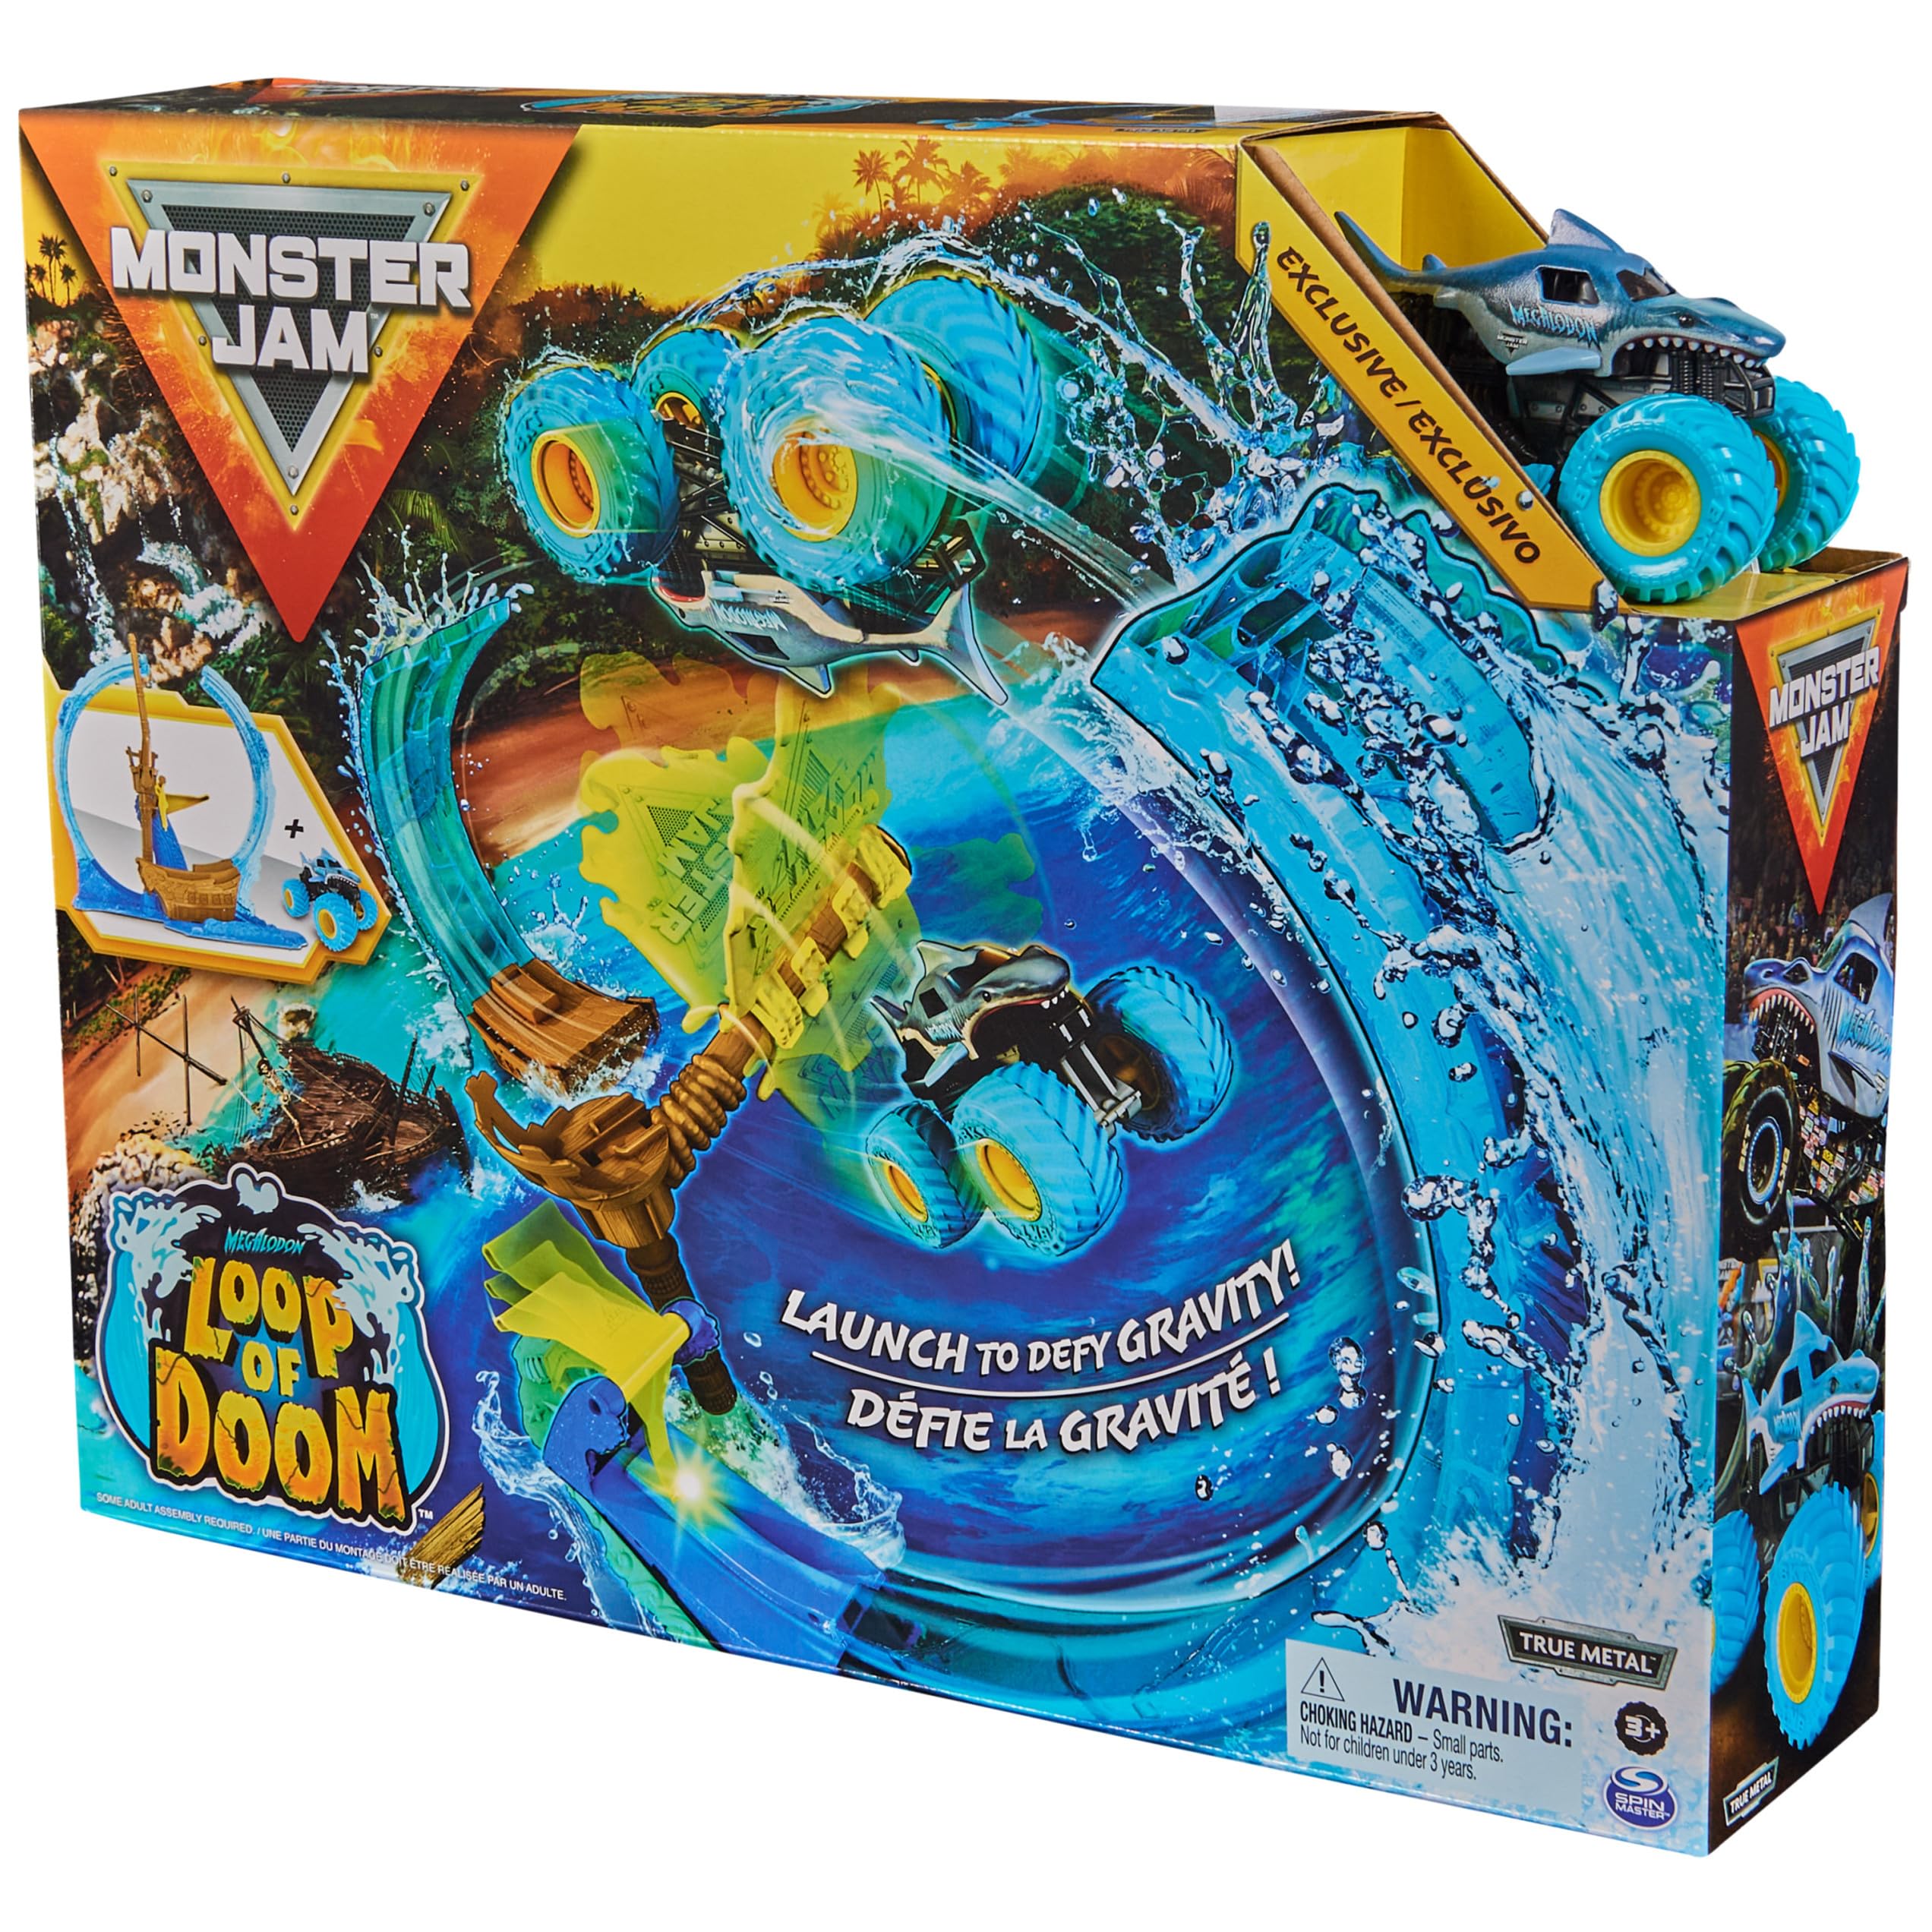 Monster Jam, Megalodon Loop of Doom Stunt Playset with Exclusive 1:64 Scale Die-Cast Monster Truck for Kids Toys for Boys Ages 3 and up